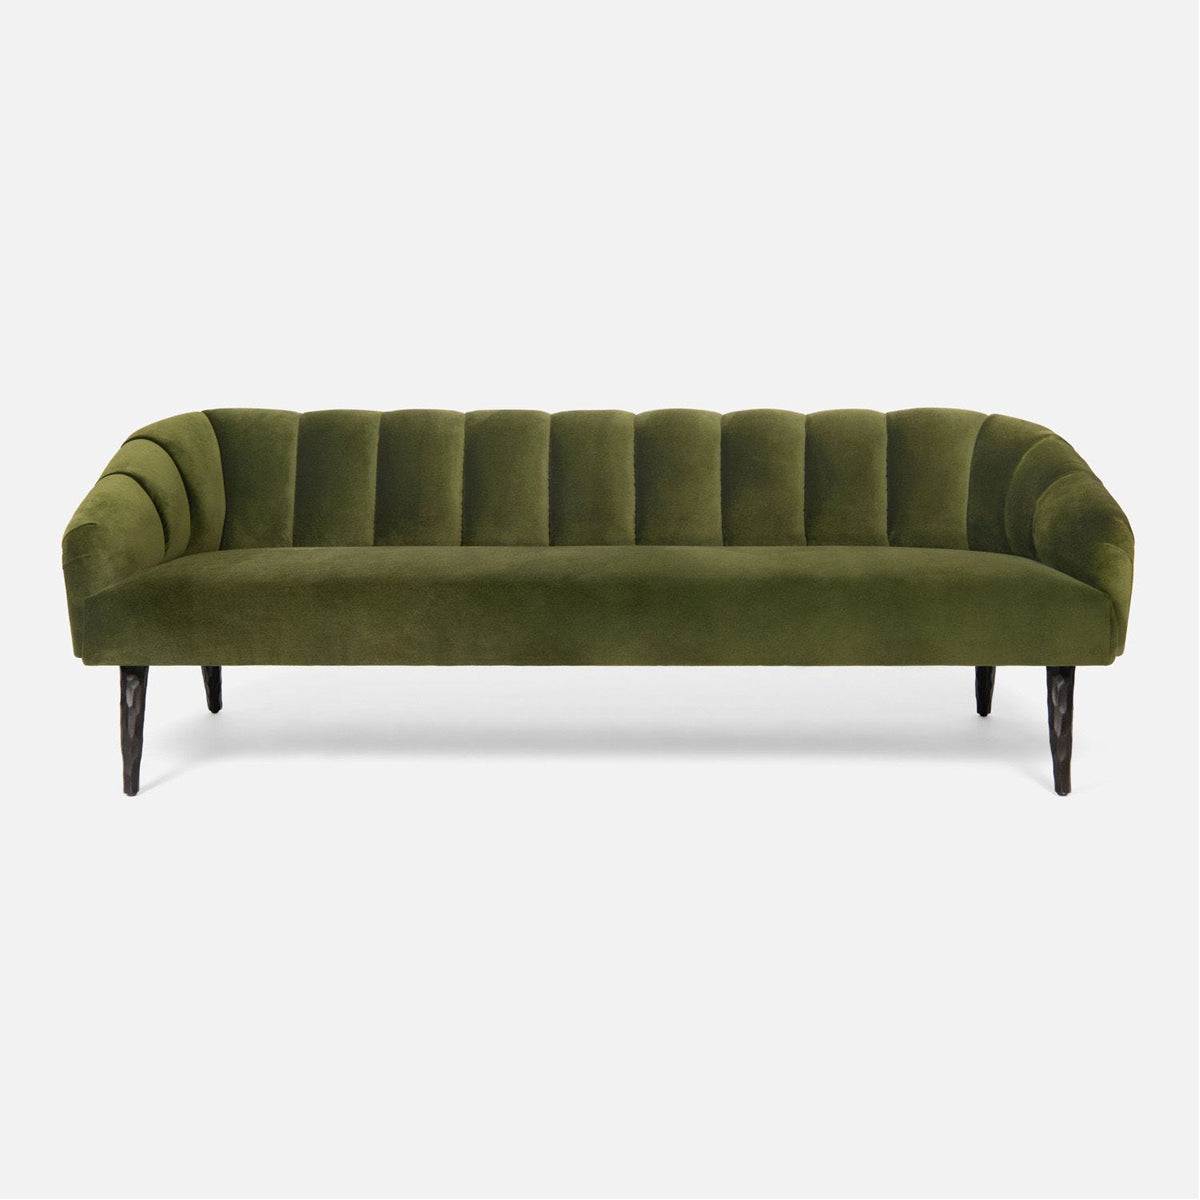 Made Goods Rooney Upholstered Shell Sofa in Pagua High-Performance Fabric